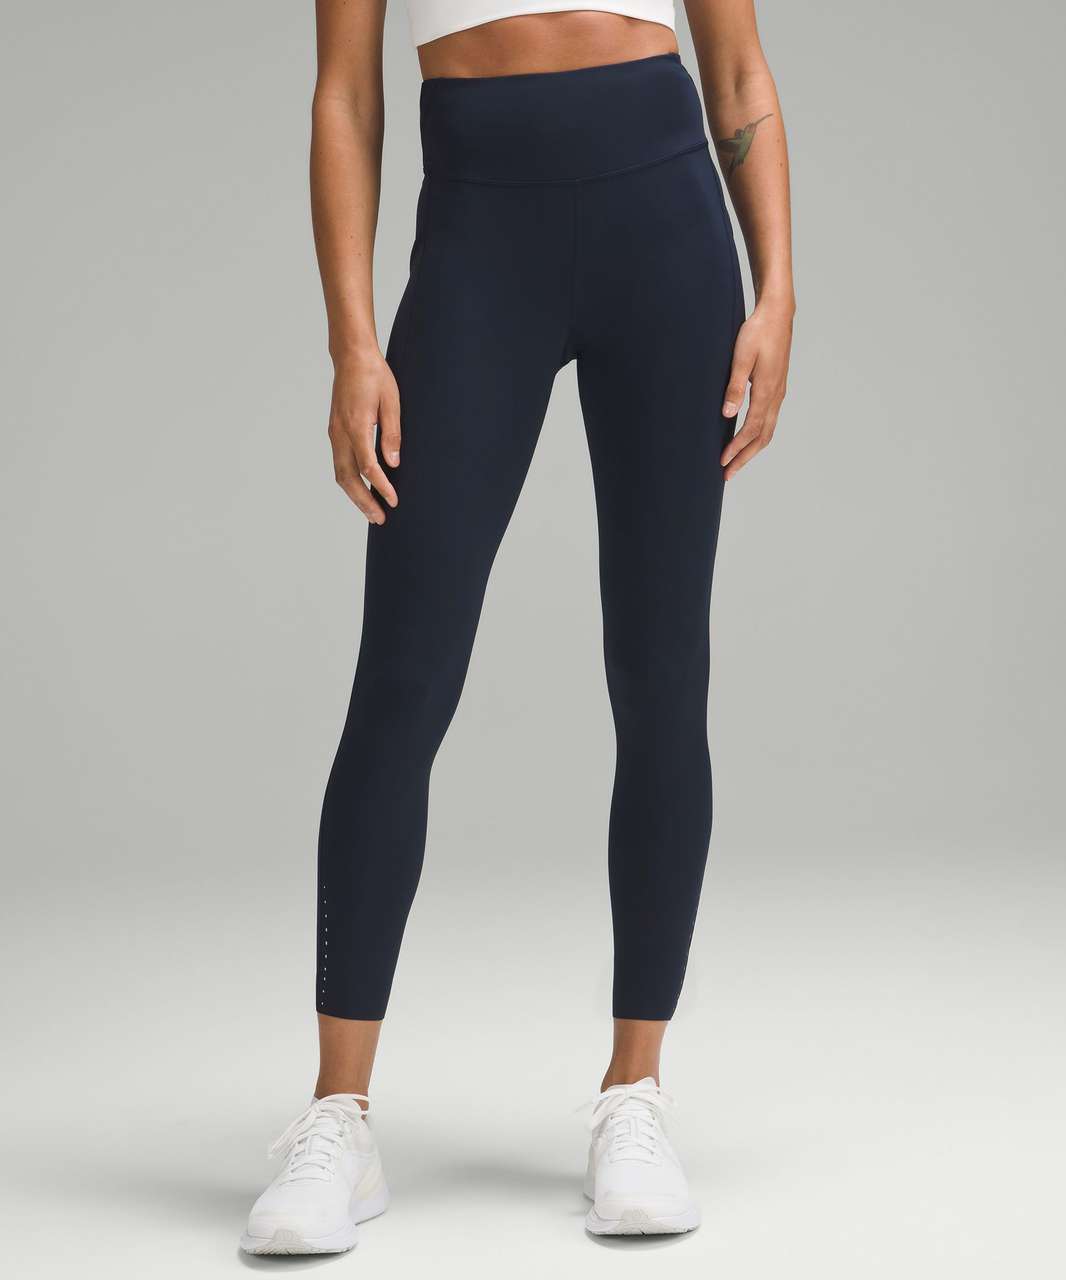 Lululemon Fast and Free High-Rise Tight 25" *Pockets - True Navy